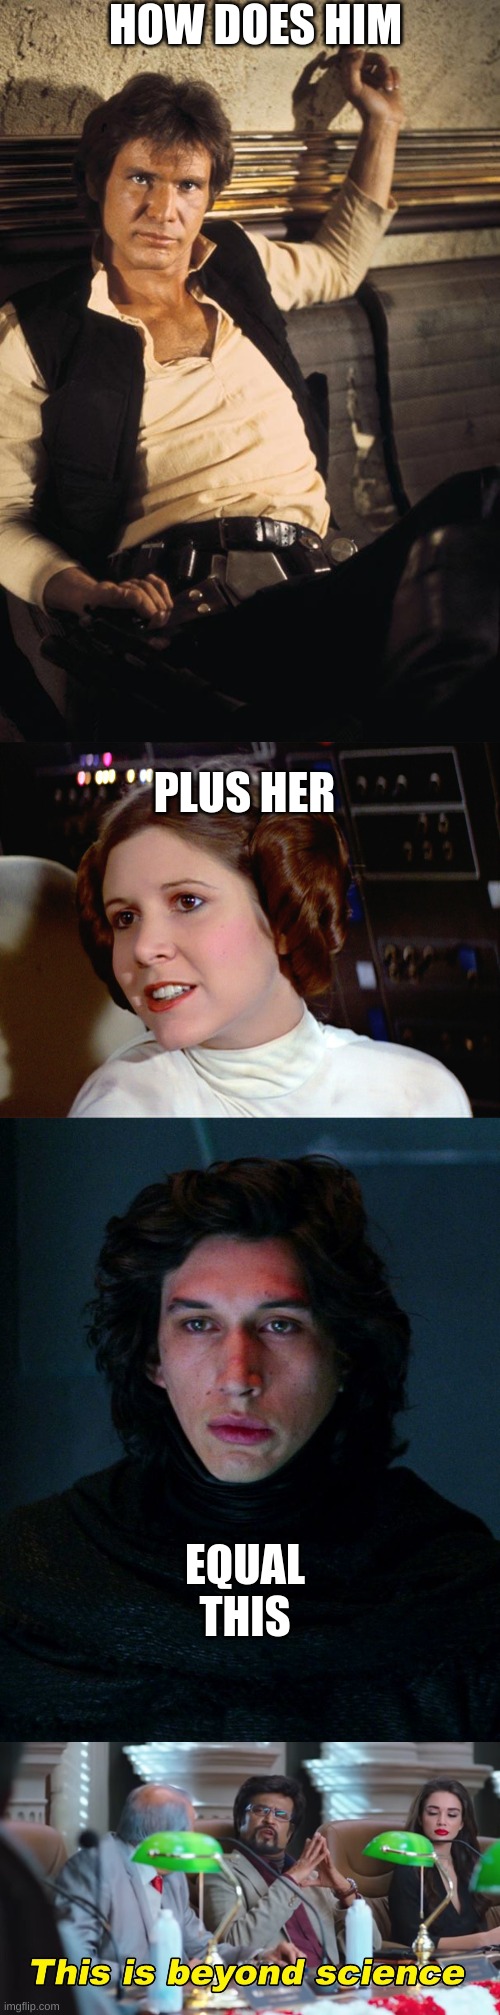 HOW DOES HIM; PLUS HER; EQUAL THIS | image tagged in memes,han solo,princess leia too easy,kylo ren,this is beyond science | made w/ Imgflip meme maker